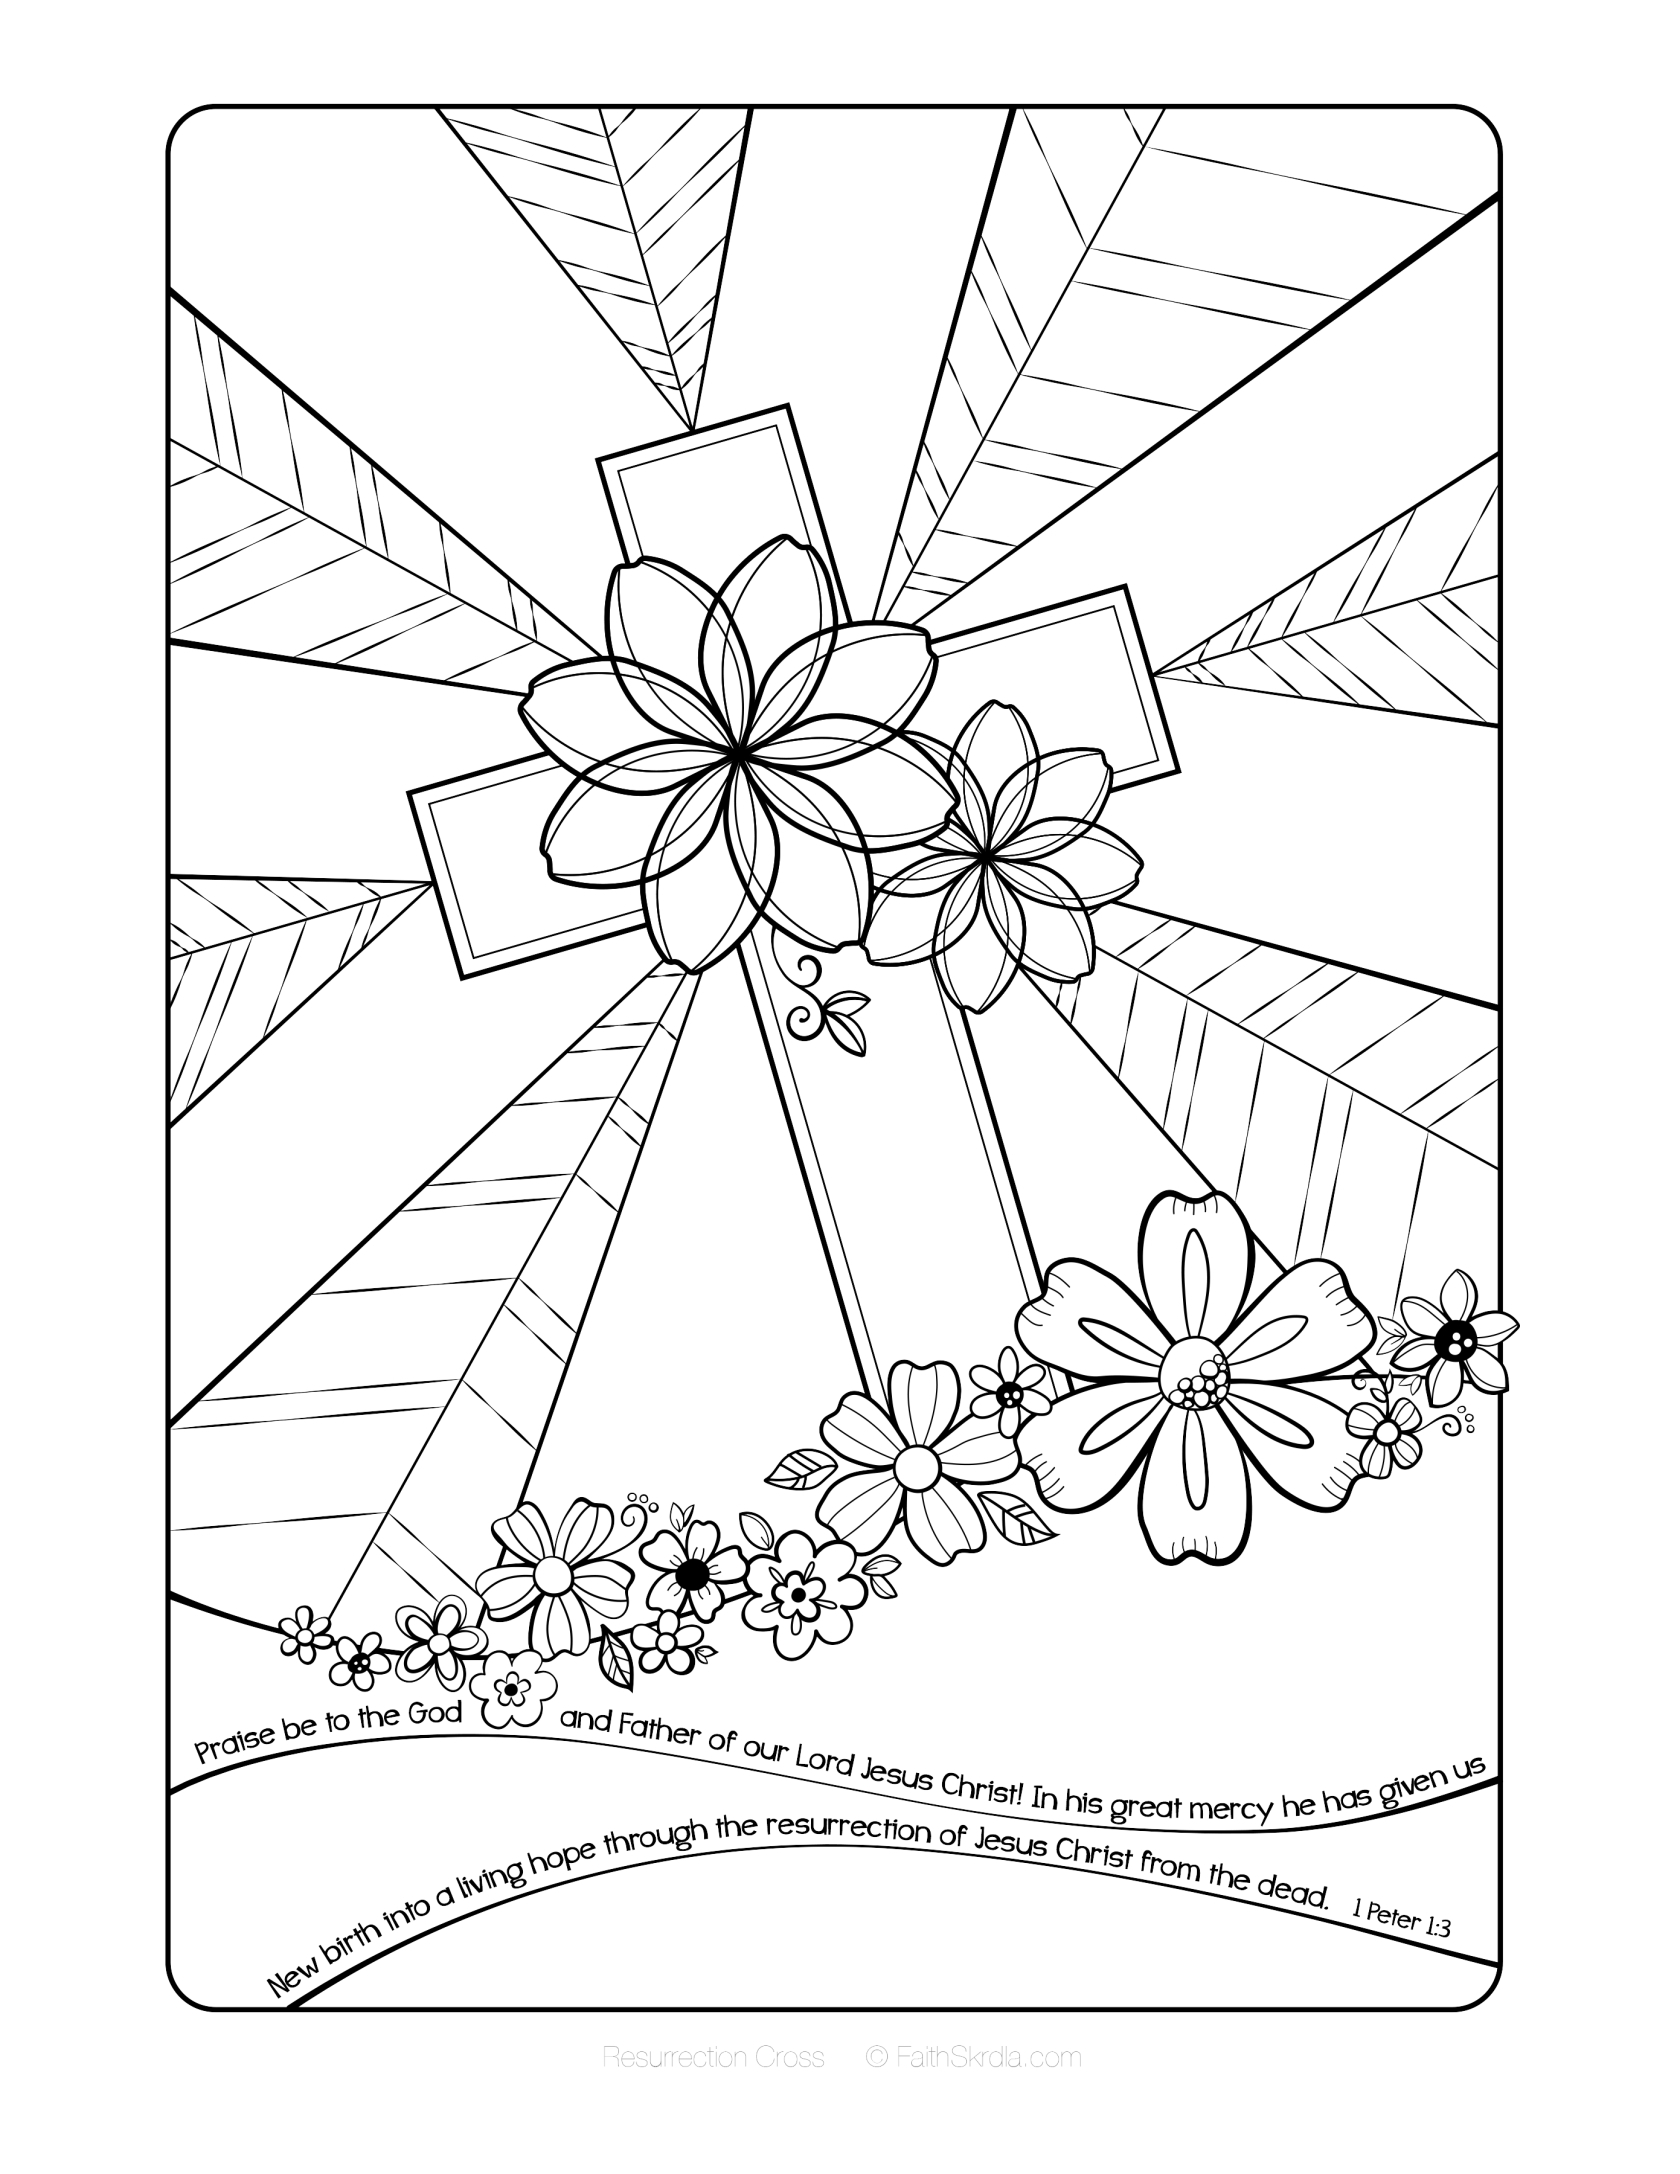 Resurrection Coloring Pages For Preschoolers 28 Free Bible Coloring Pages For Toddlers Collection Coloring Sheets